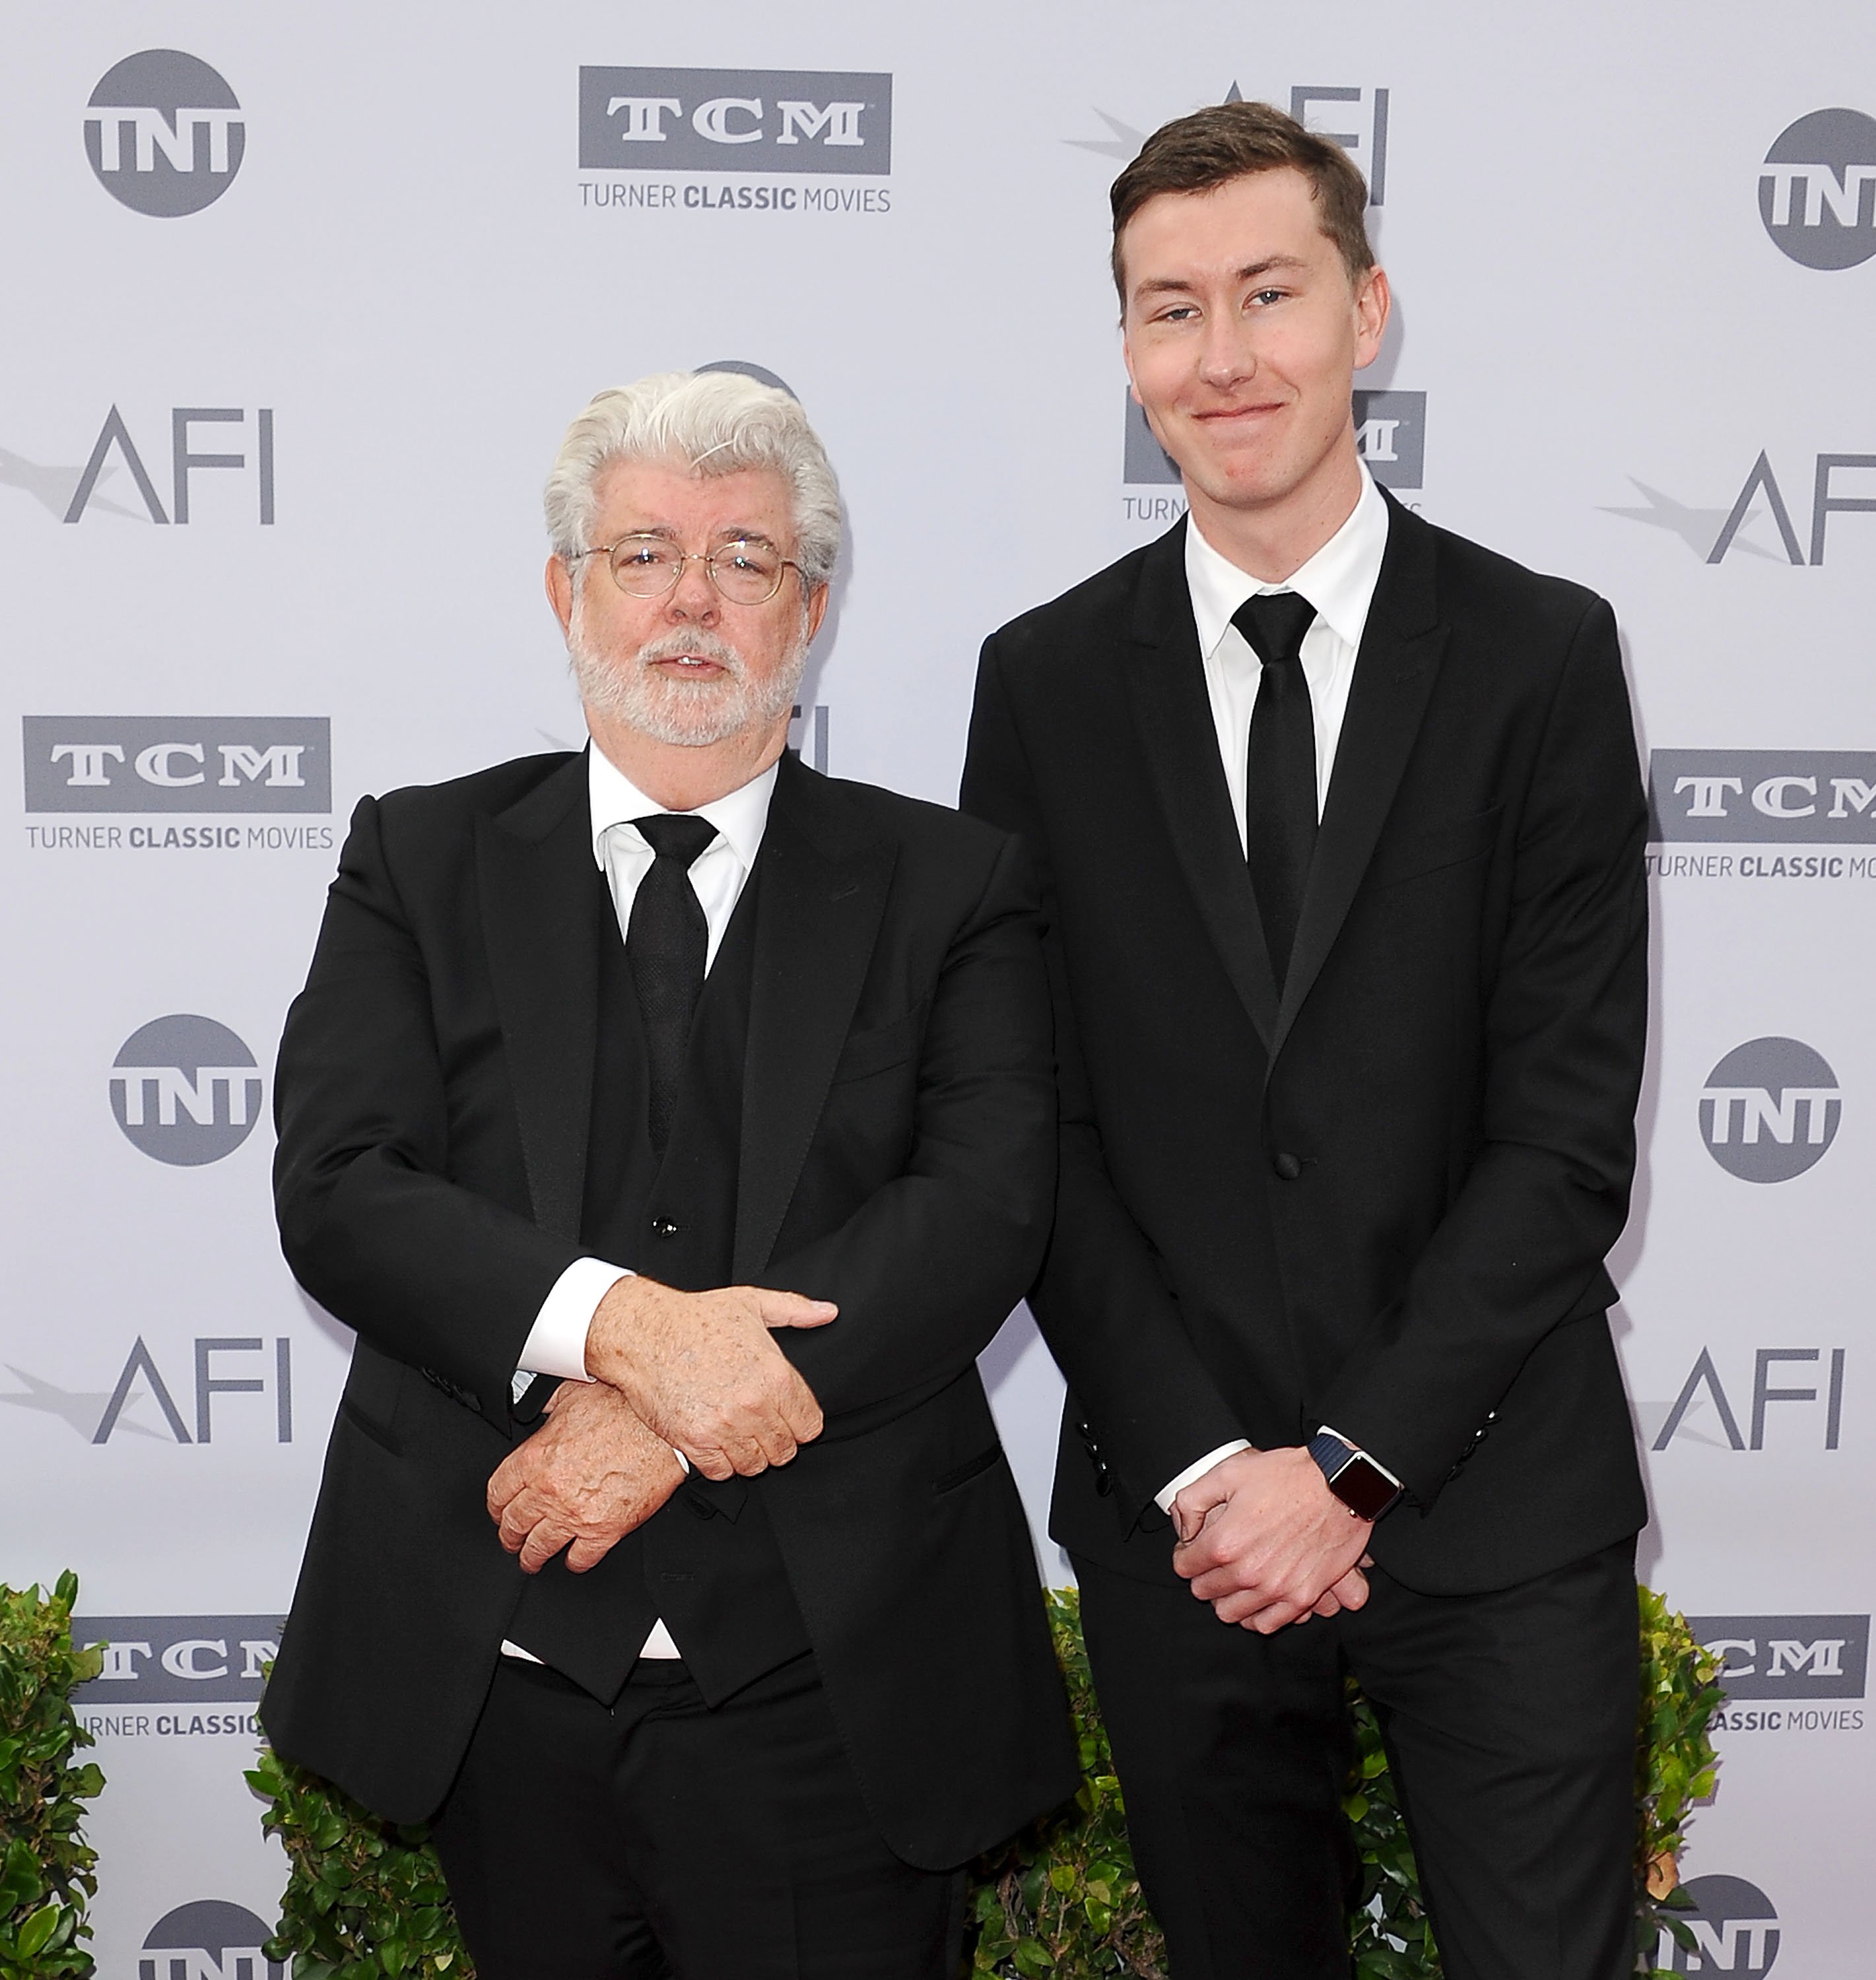 George Lucas and Jett Lucas at the 44th AFI Life Achievement Awards gala on June 9, 2016 | Source: Getty Images